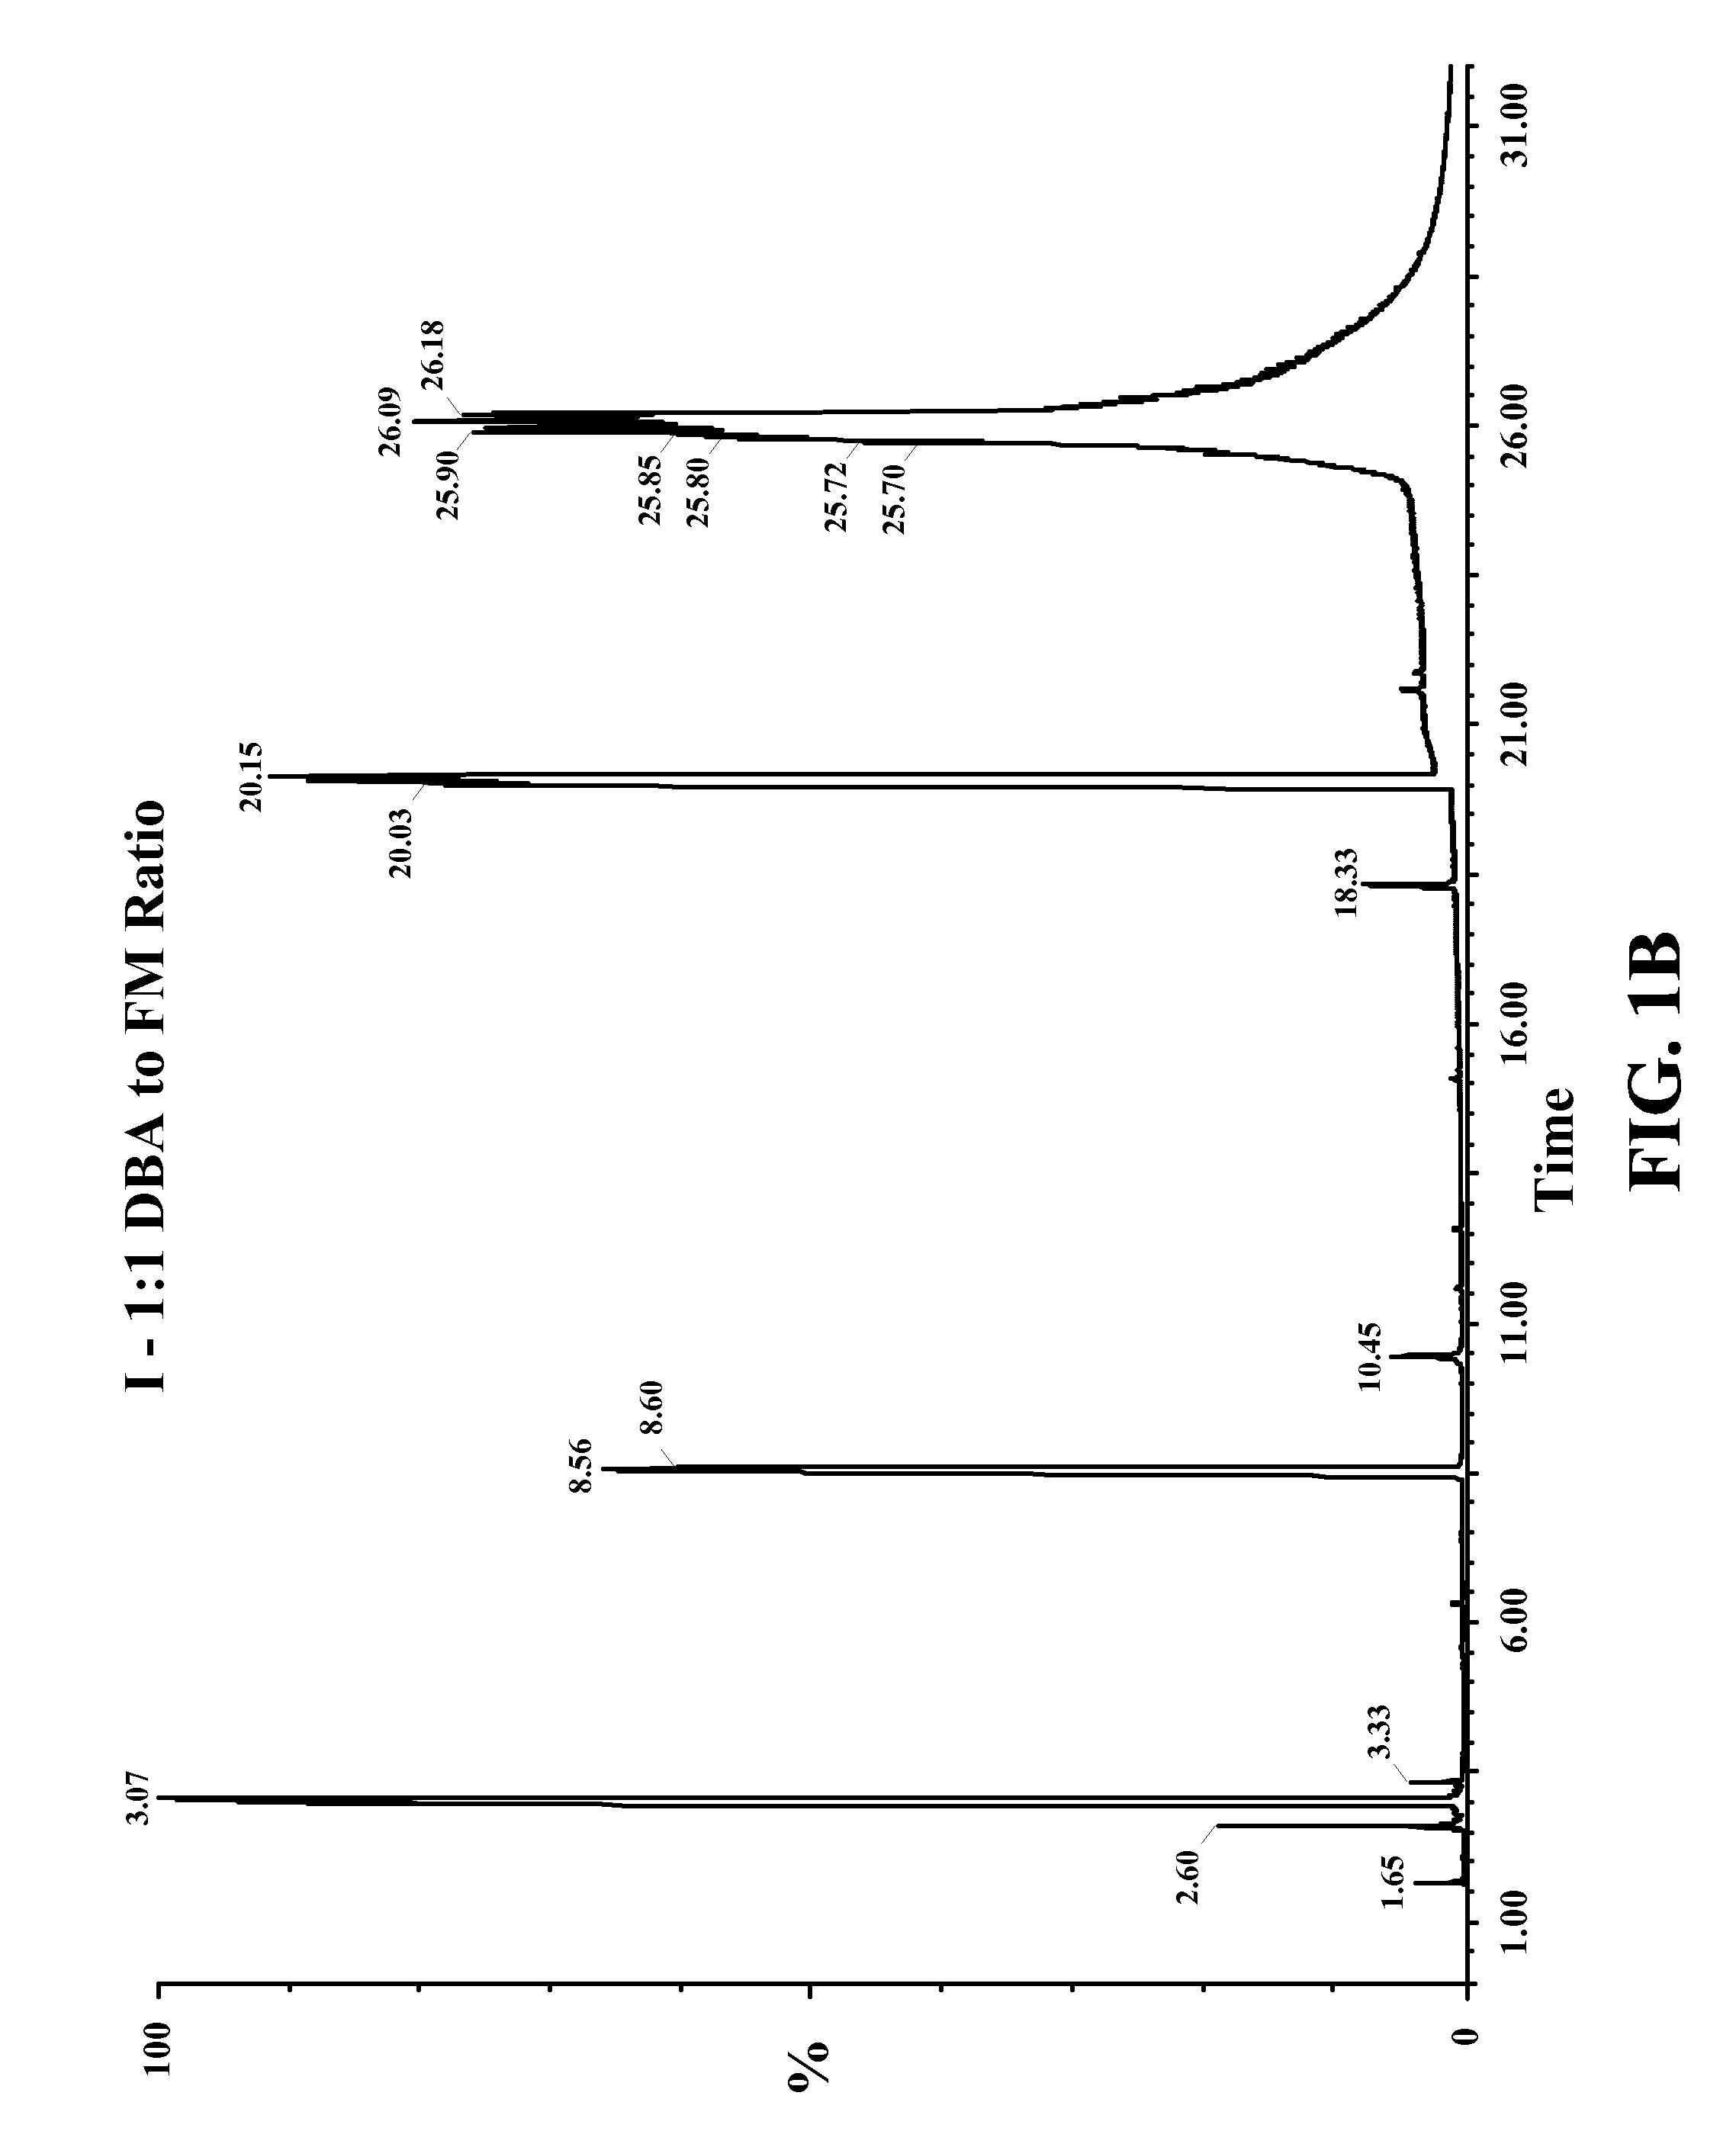 Aldehyde-amine formulations and method for making and using same